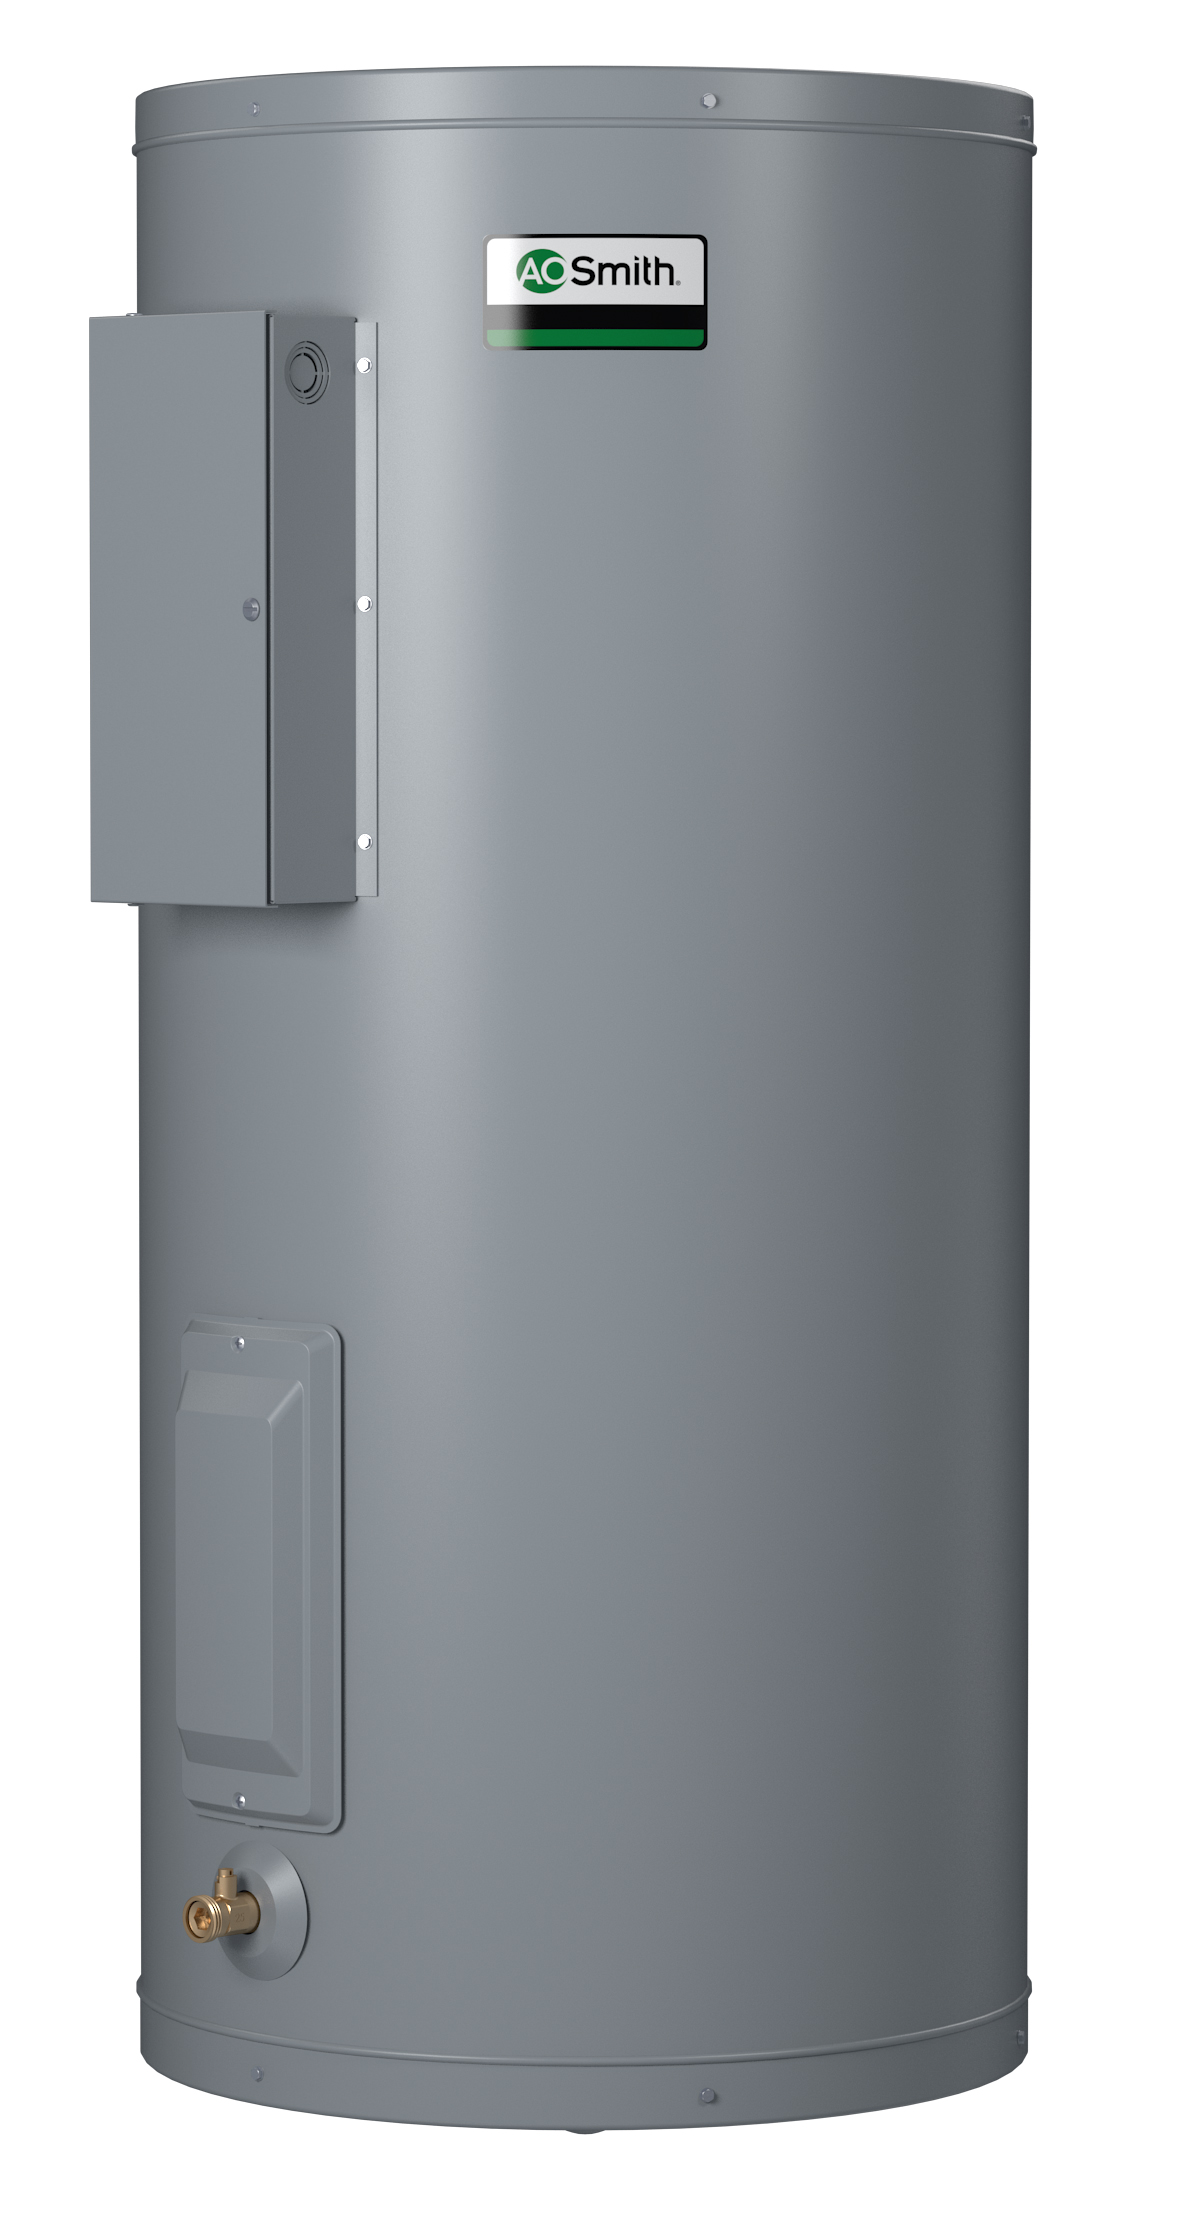 AO SMITH DEN-120D: 120 GALLONS, 2.5 KW, 208 VOLT, 1 PHASE, (2-2500 WATT ELEMENTS, NON-SIMULTANEOUS WIRING), DURA-POWER, LIGHT DUTY COMMERCIAL ELECTRIC WATER HEATER